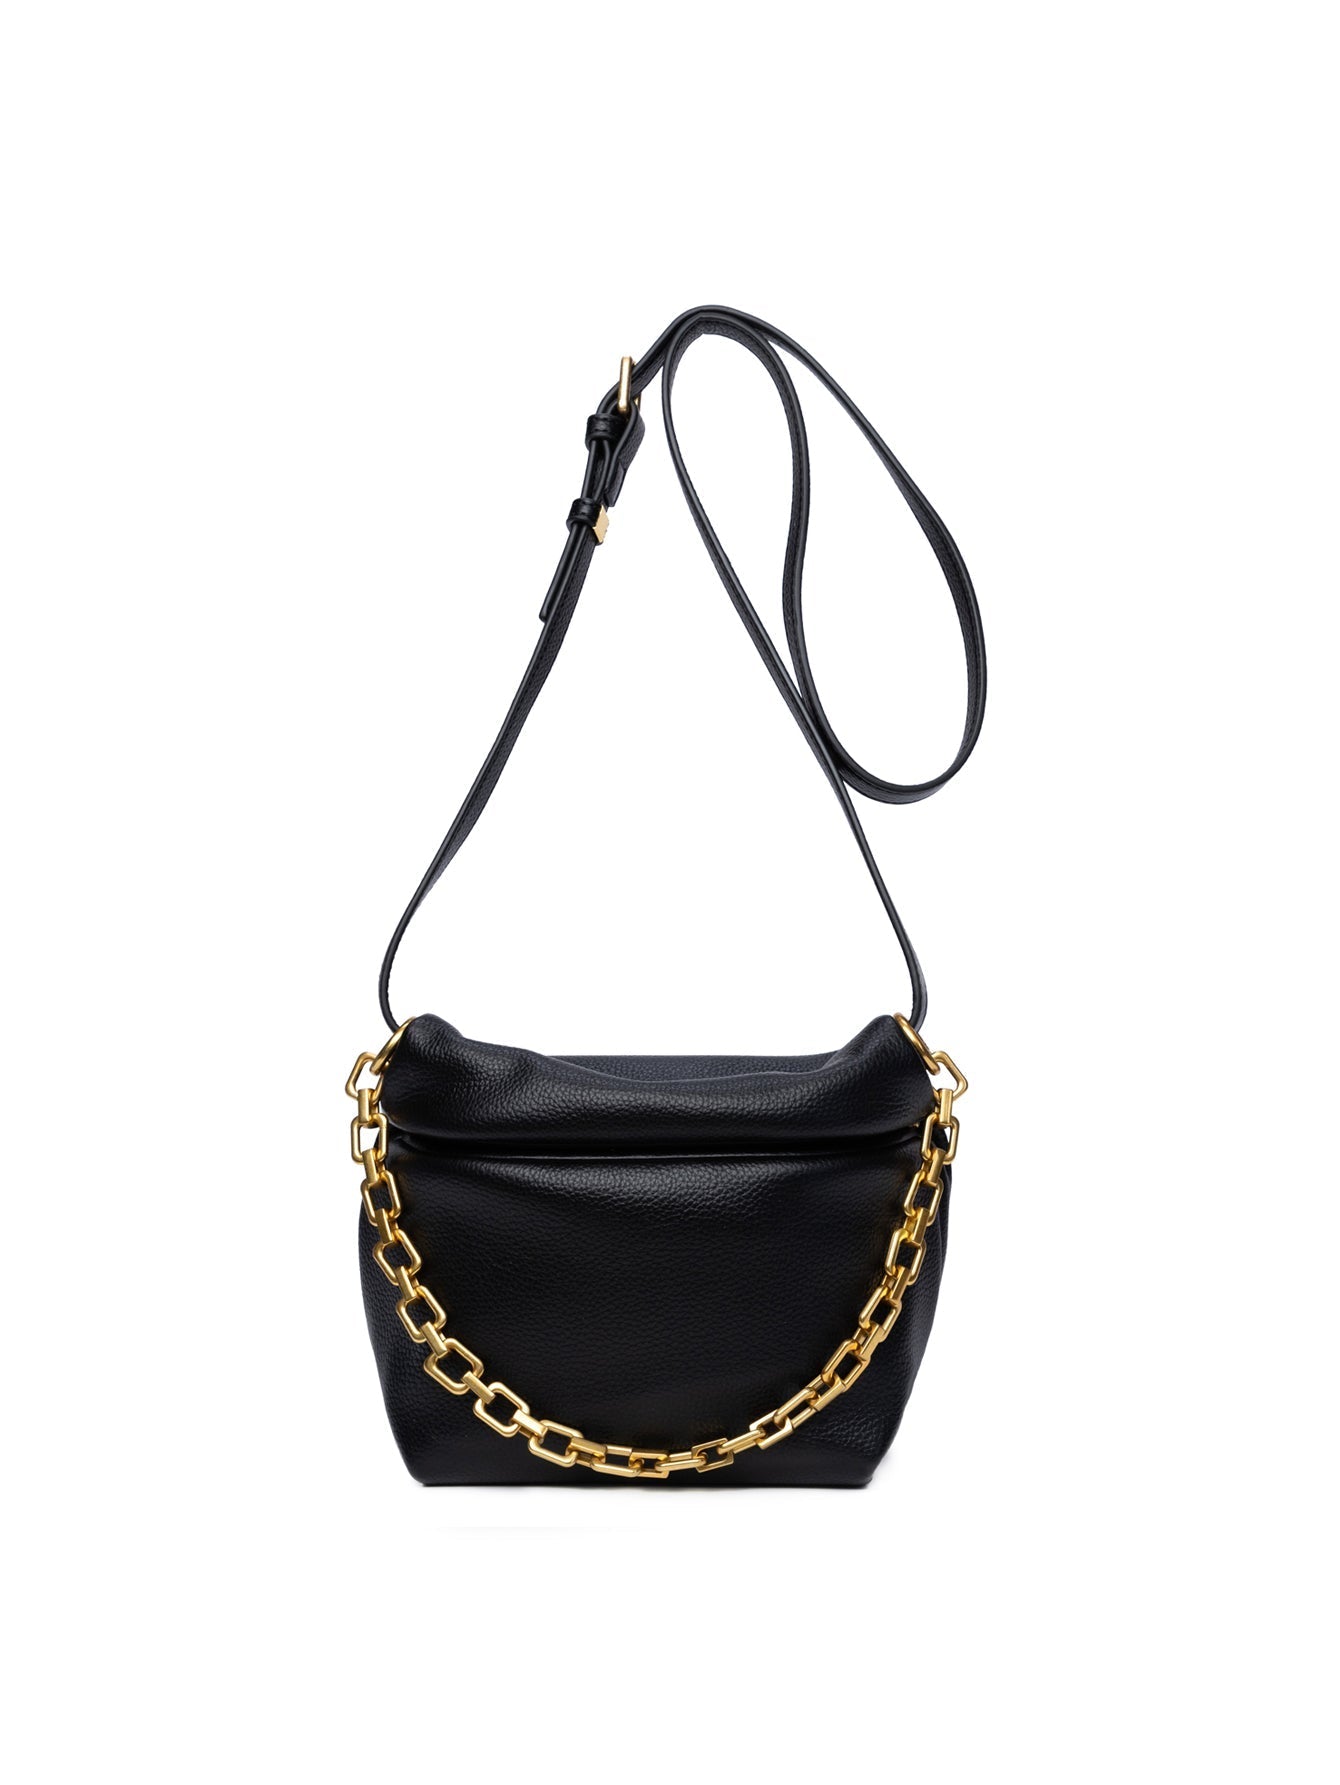 Women Small Quilted PU Leather Shoulder Bags Soft Crossbody Handbag Lightweight Clutch Purse with Gold Chain Strap Sai Feel